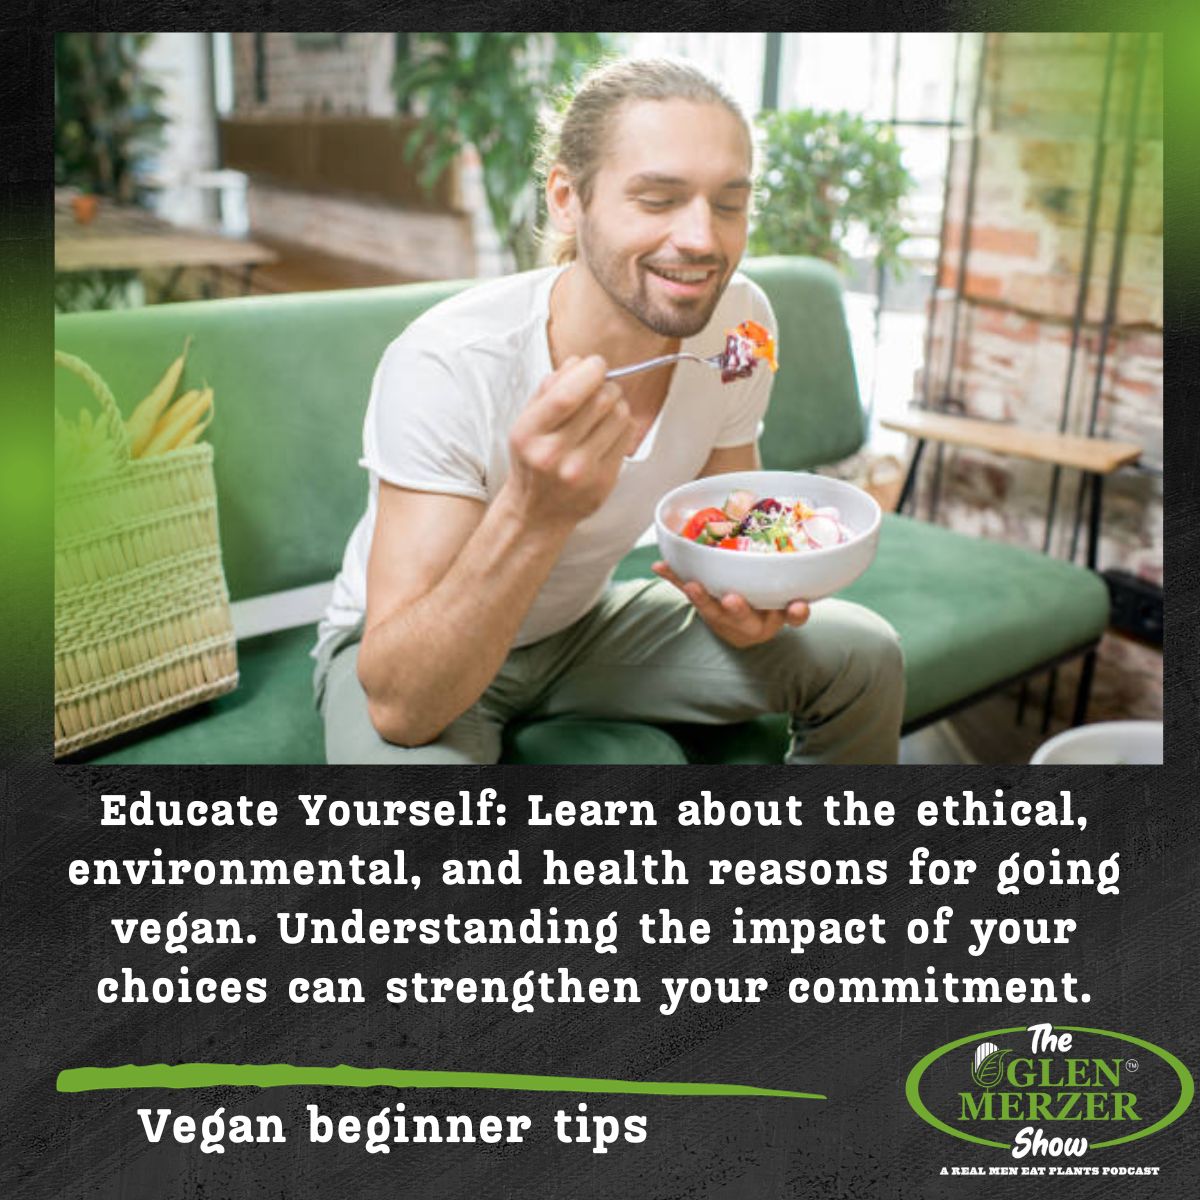 The power of knowledge fuels change. Dive into the ethical, environmental, and health reasons for choosing a vegan lifestyle. #GlenMerzerShow #VeganEducation #KnowledgeIsPower @RealMenEatPlant @pbofpodcast